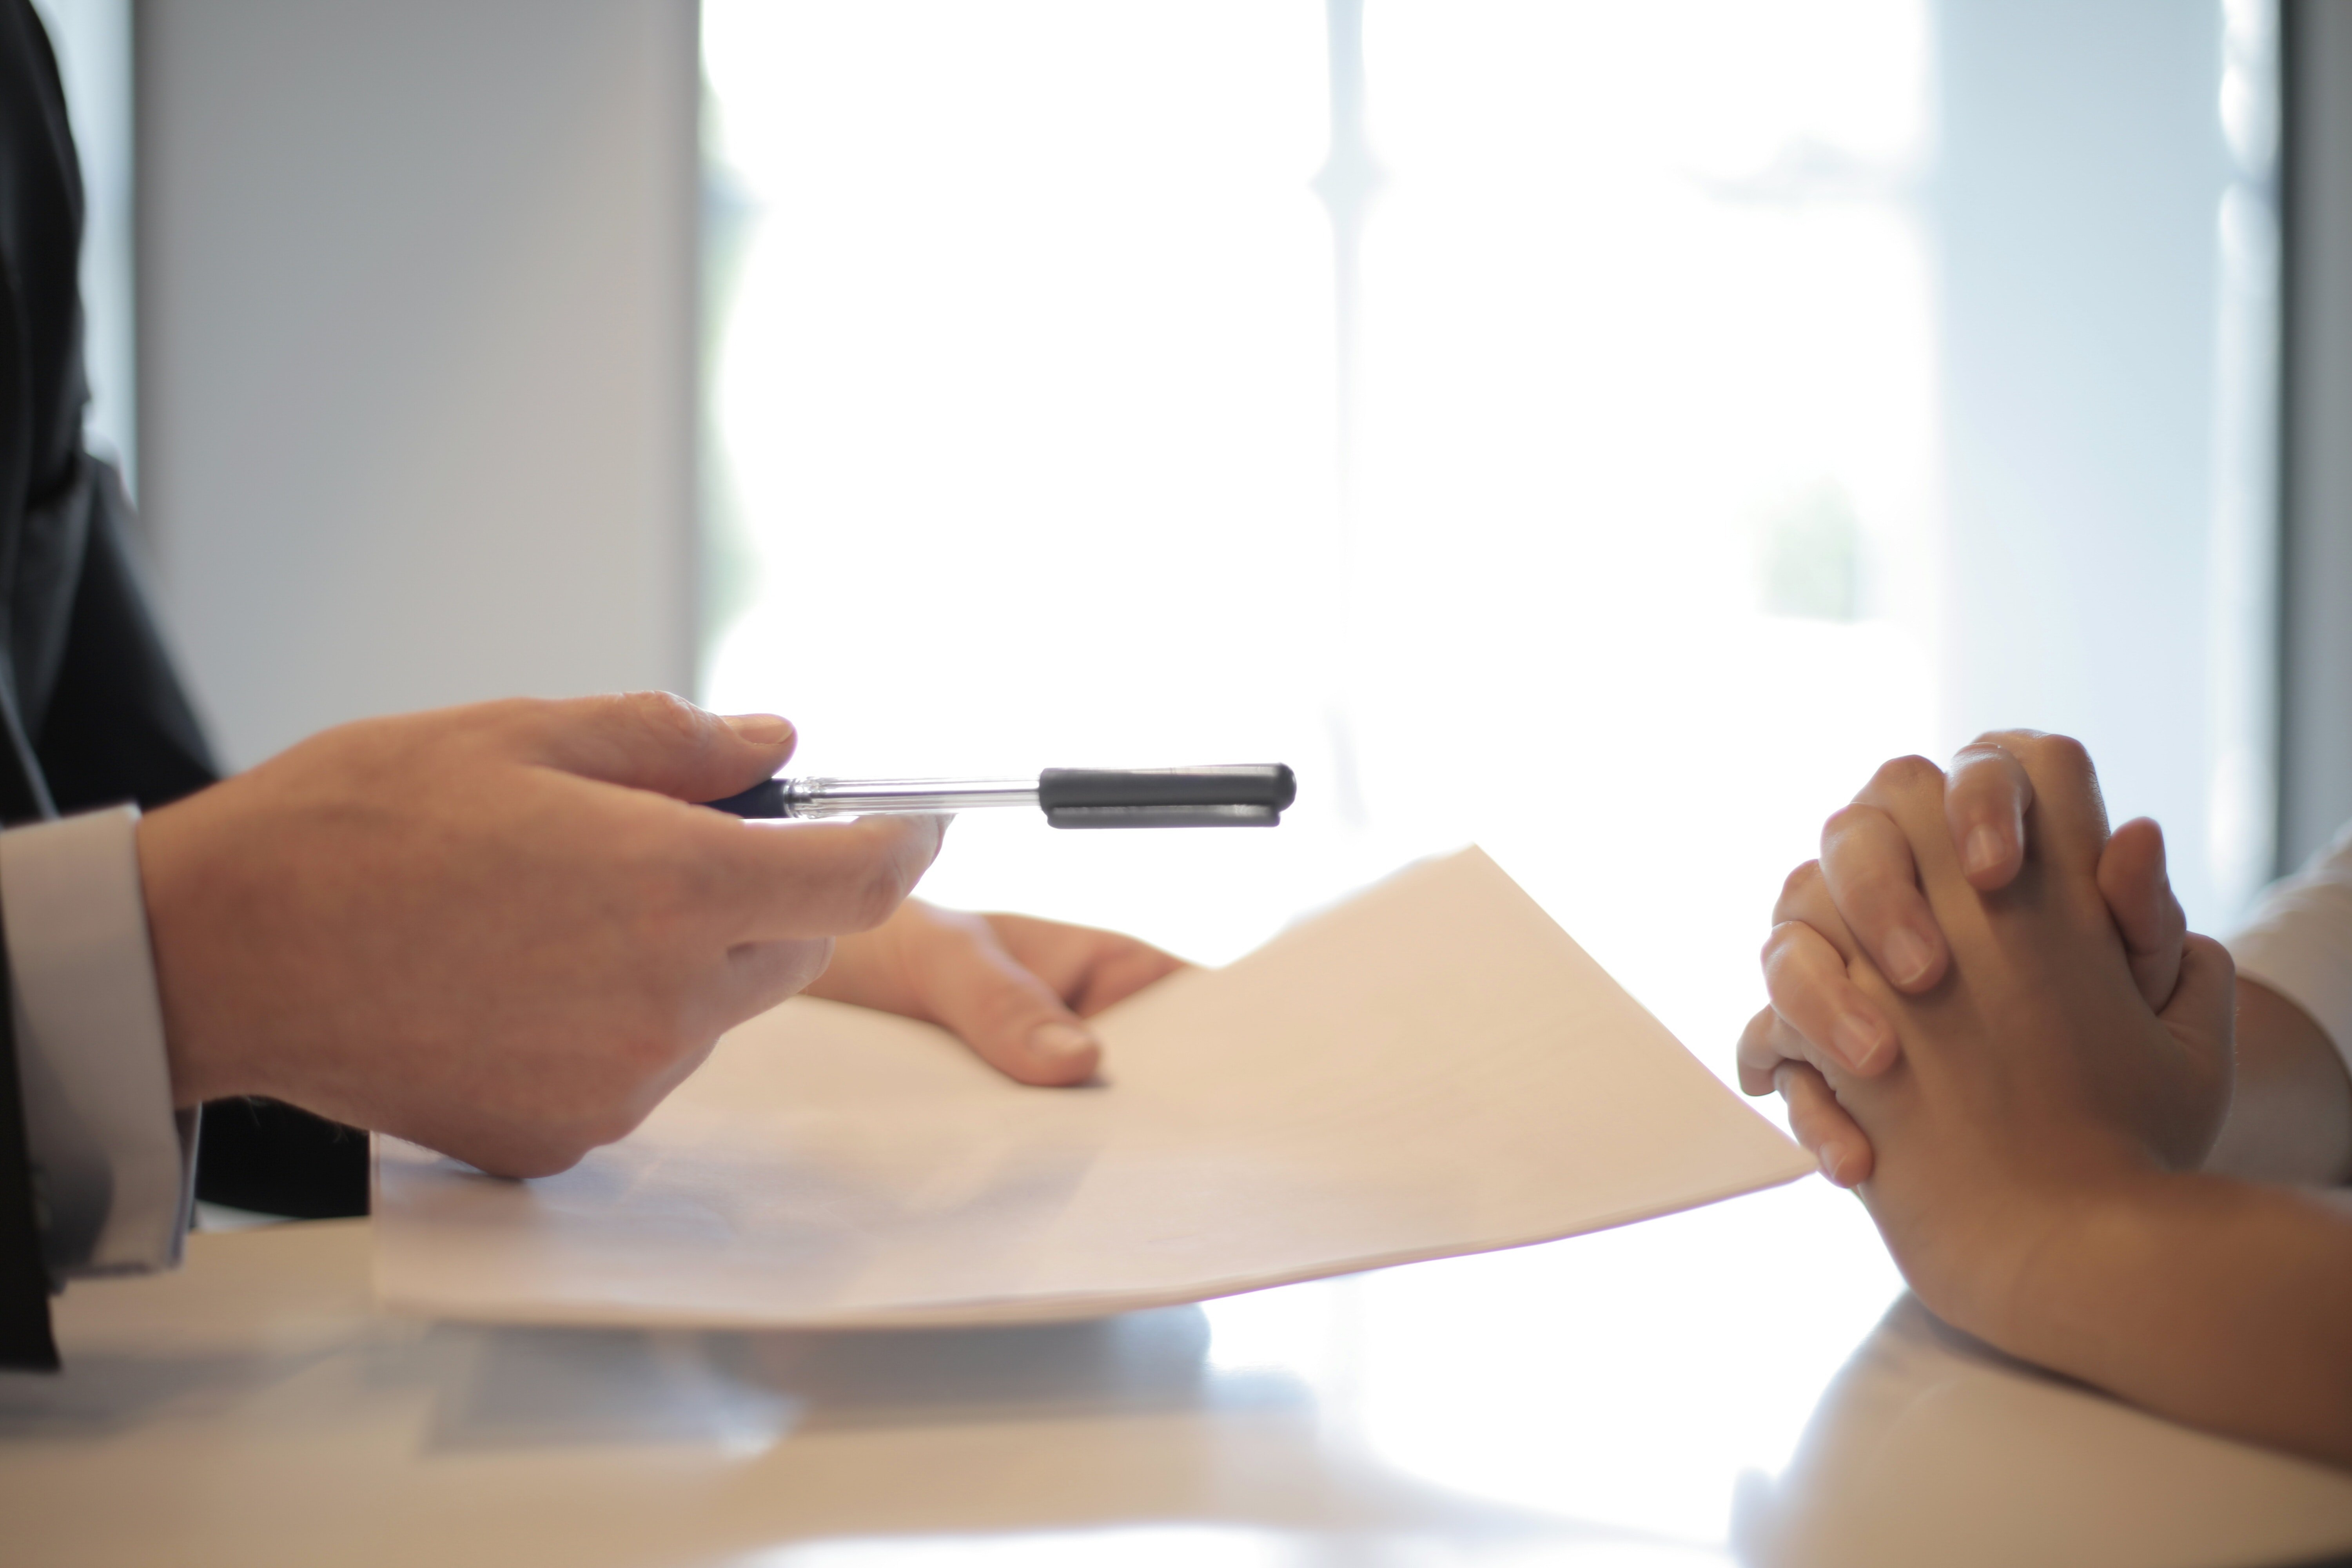 A person's holding a pen and extending a document to another person | Source: Pexels